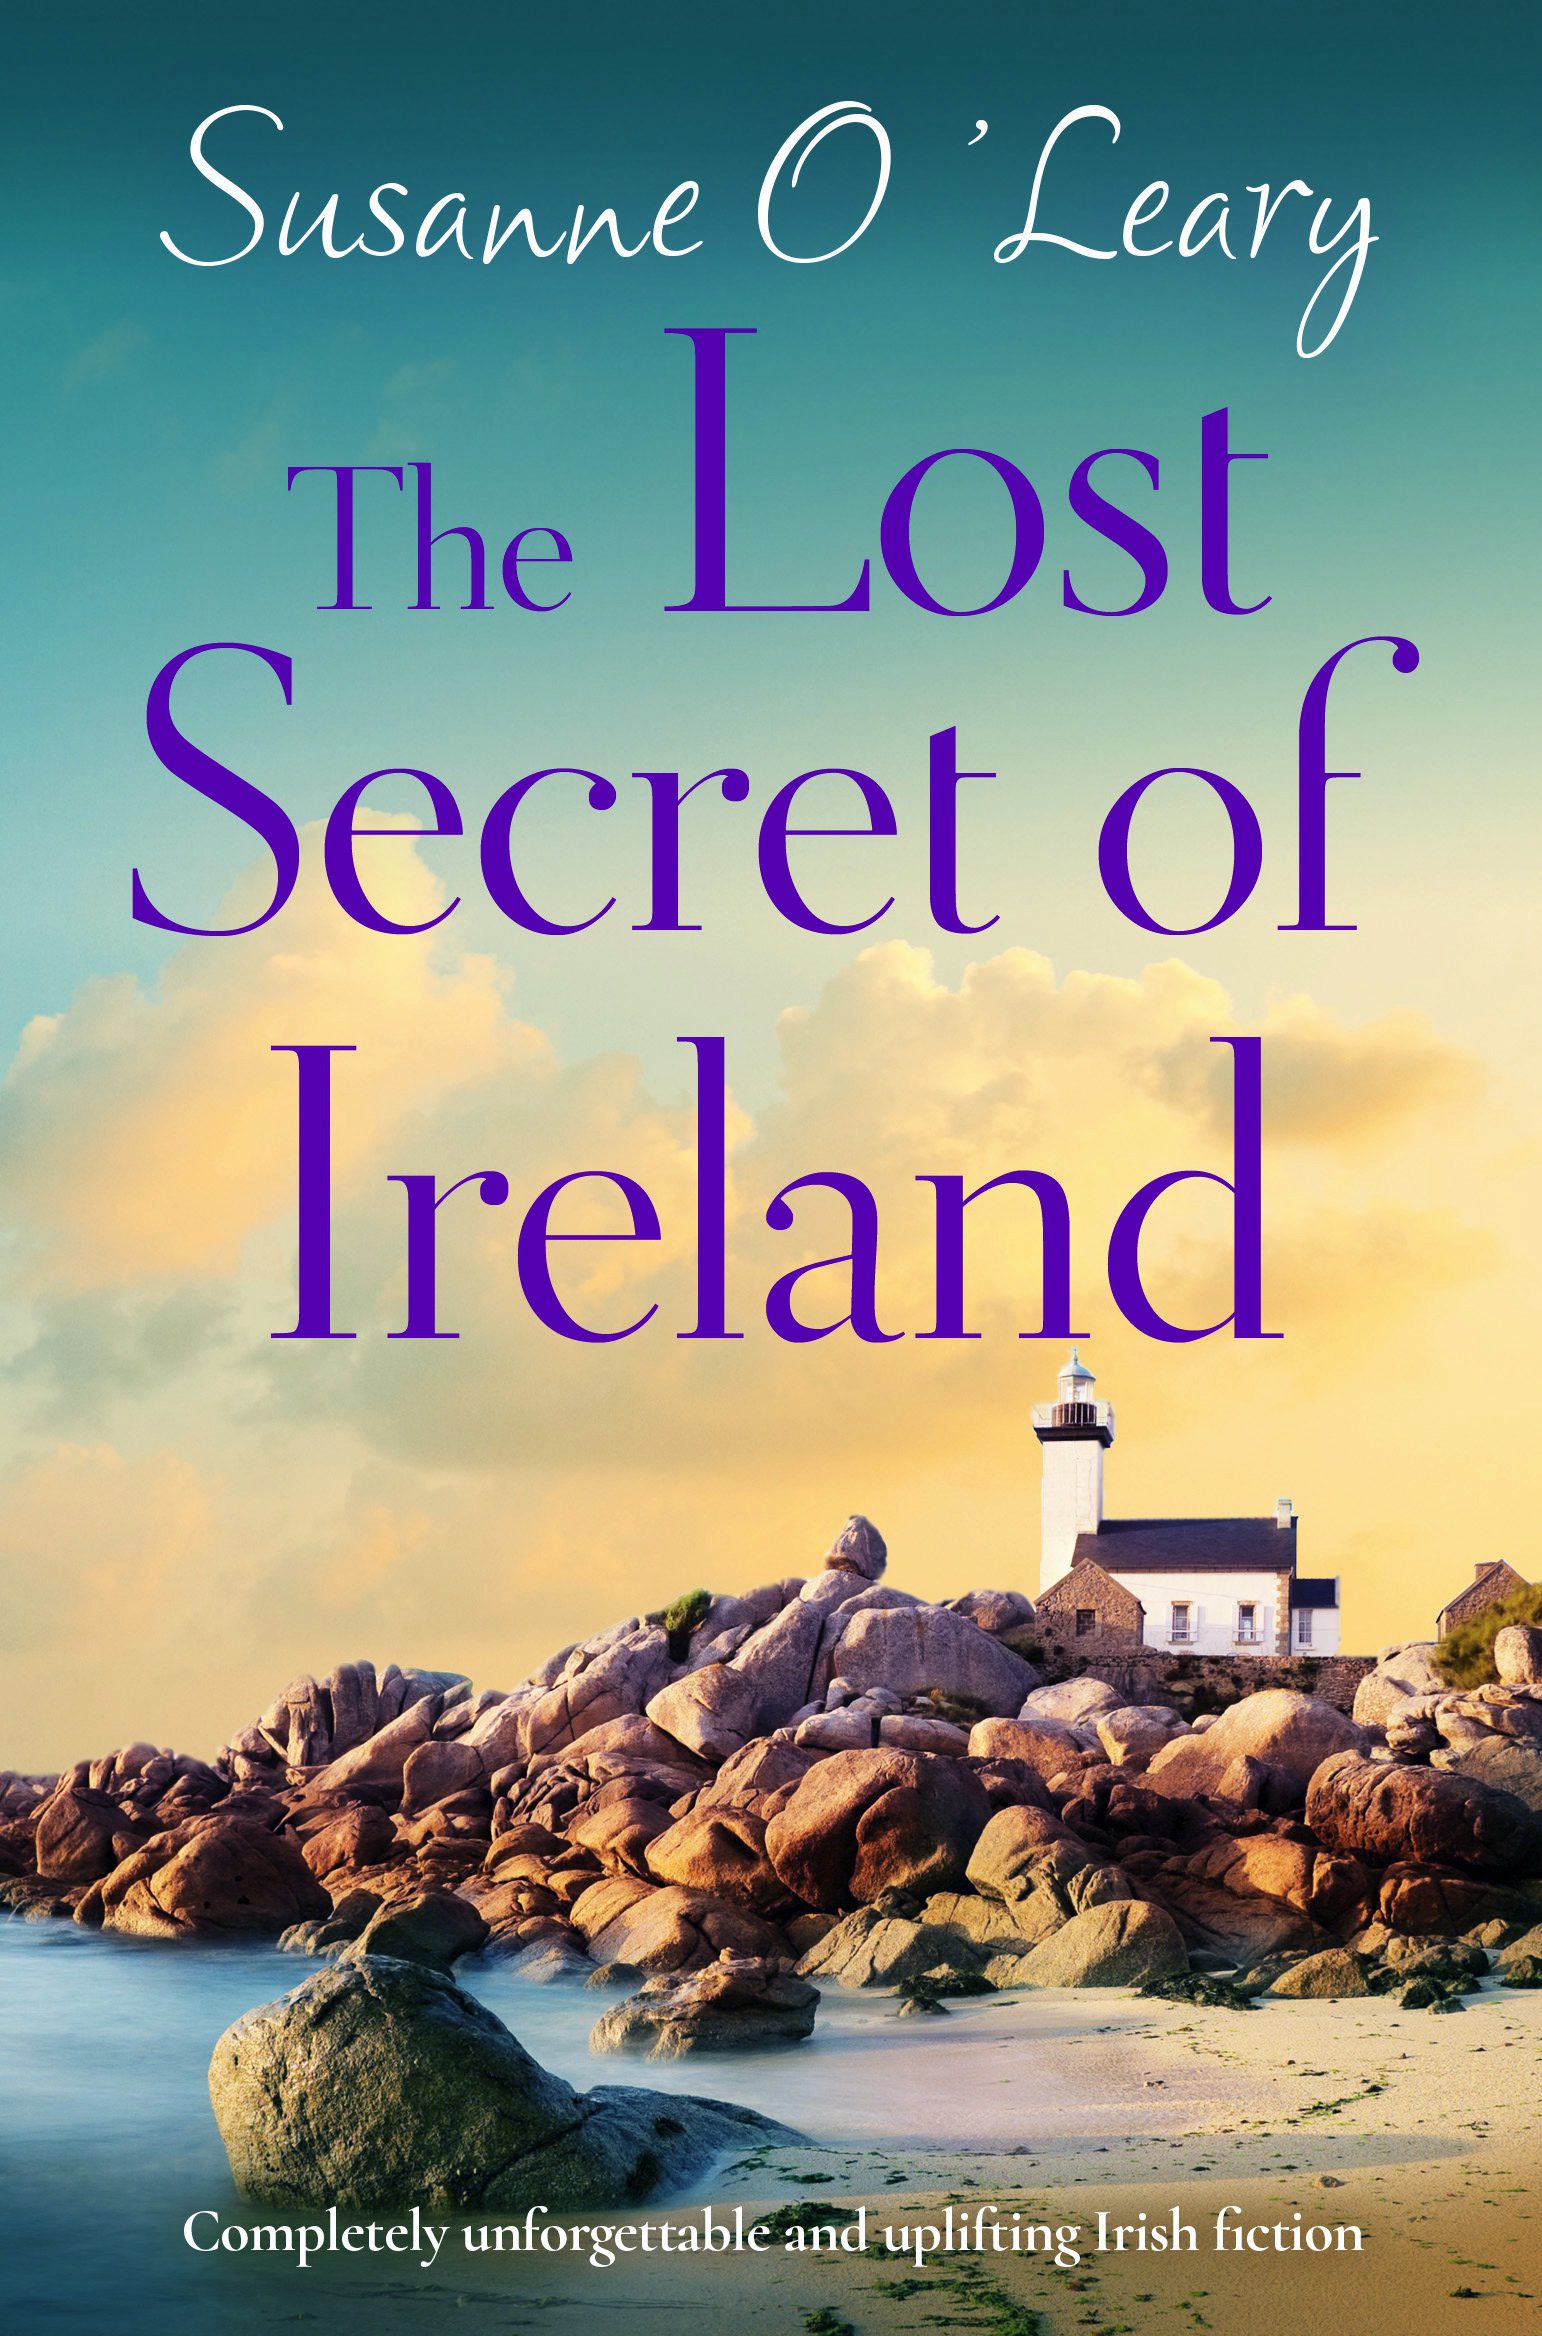 The Lost Secret of Ireland book cover